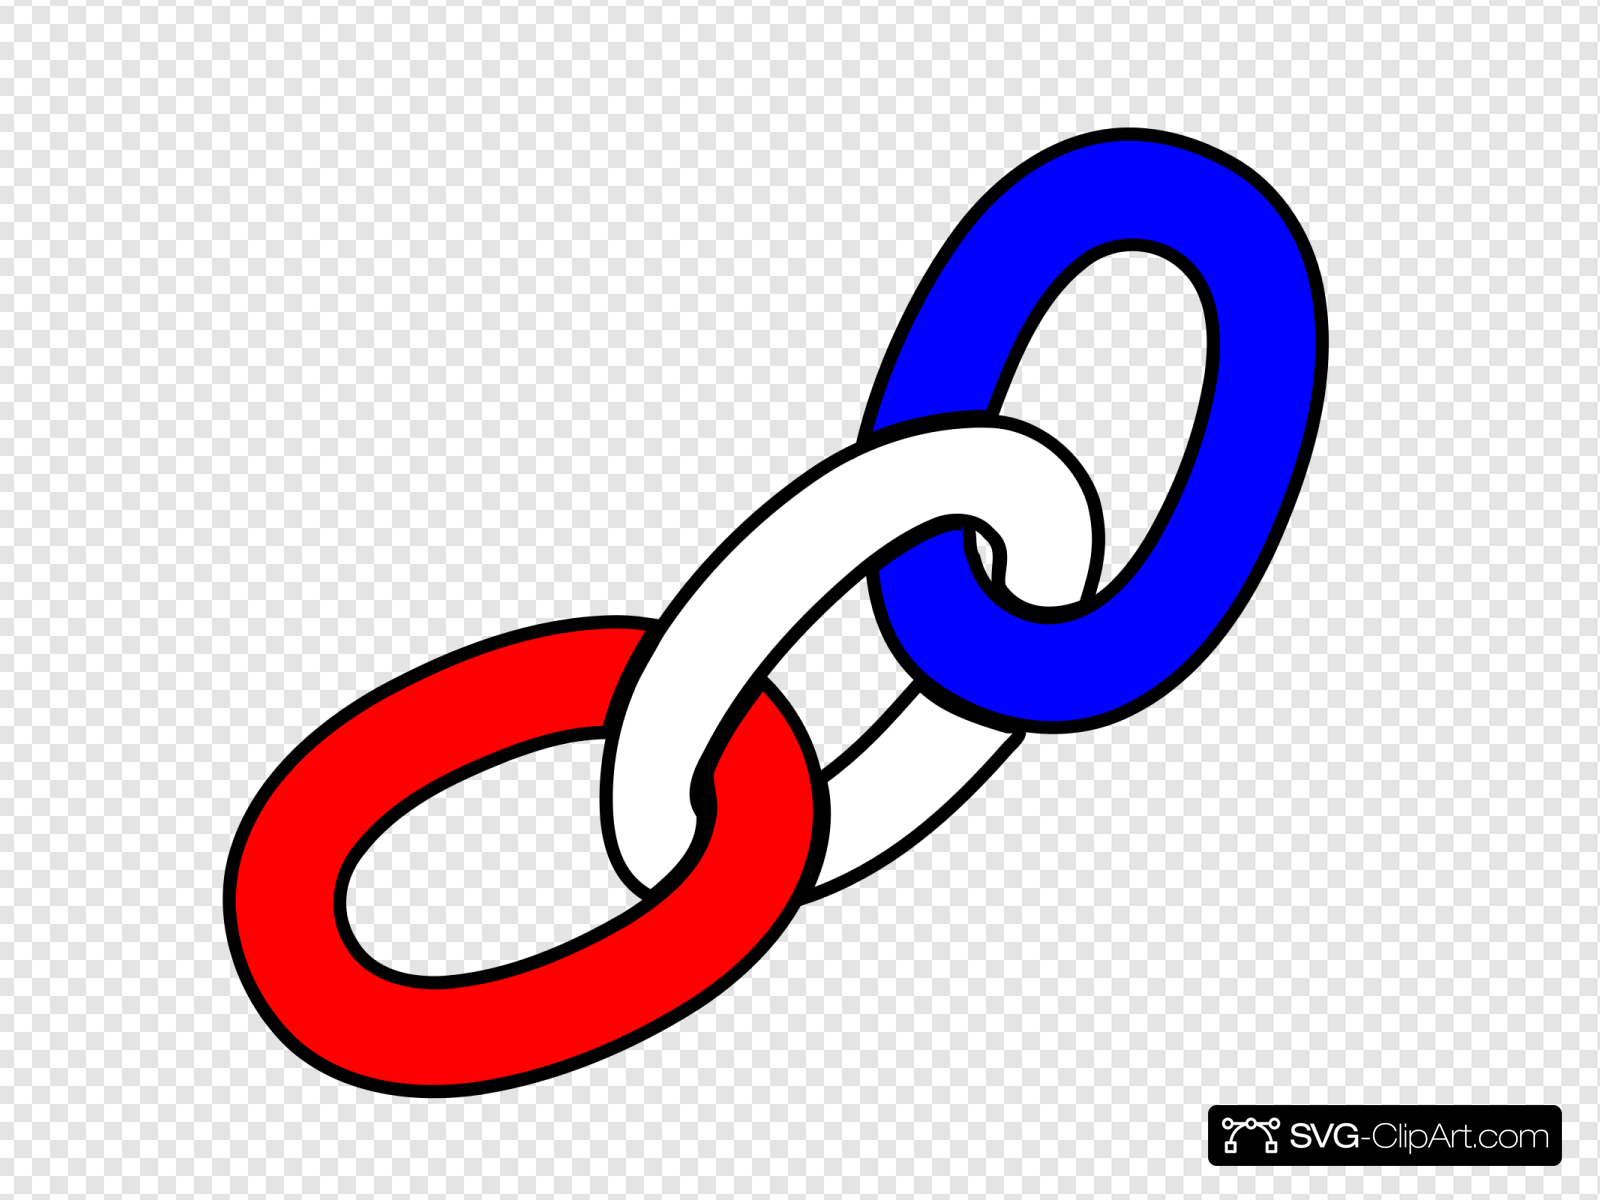 Red,white Blue Chain Clip art, Icon and SVG